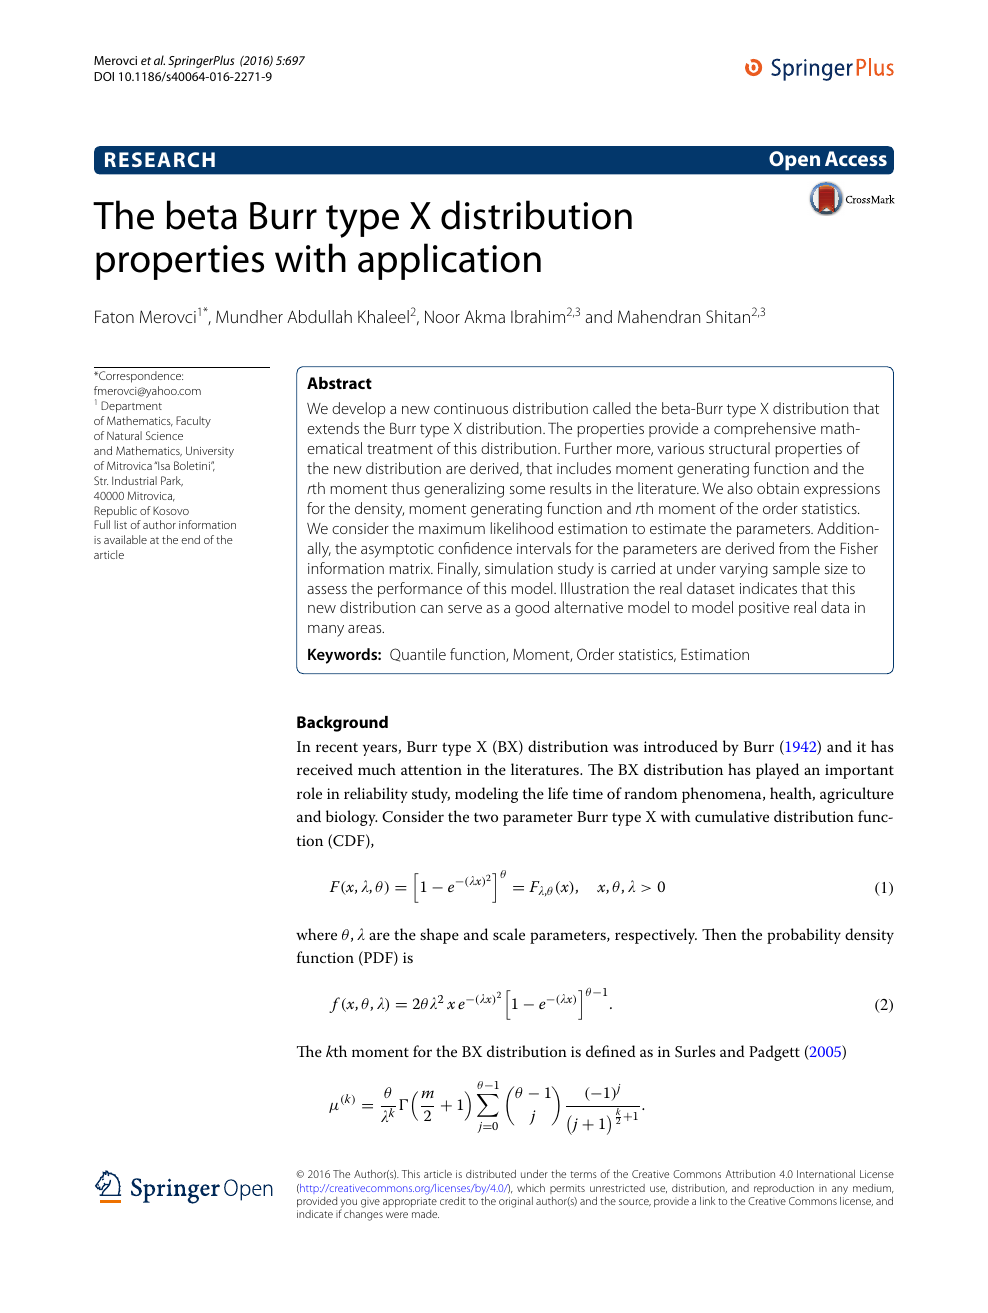 The Beta Burr Type X Distribution Properties With Application Topic Of Research Paper In Mathematics Download Scholarly Article Pdf And Read For Free On Cyberleninka Open Science Hub